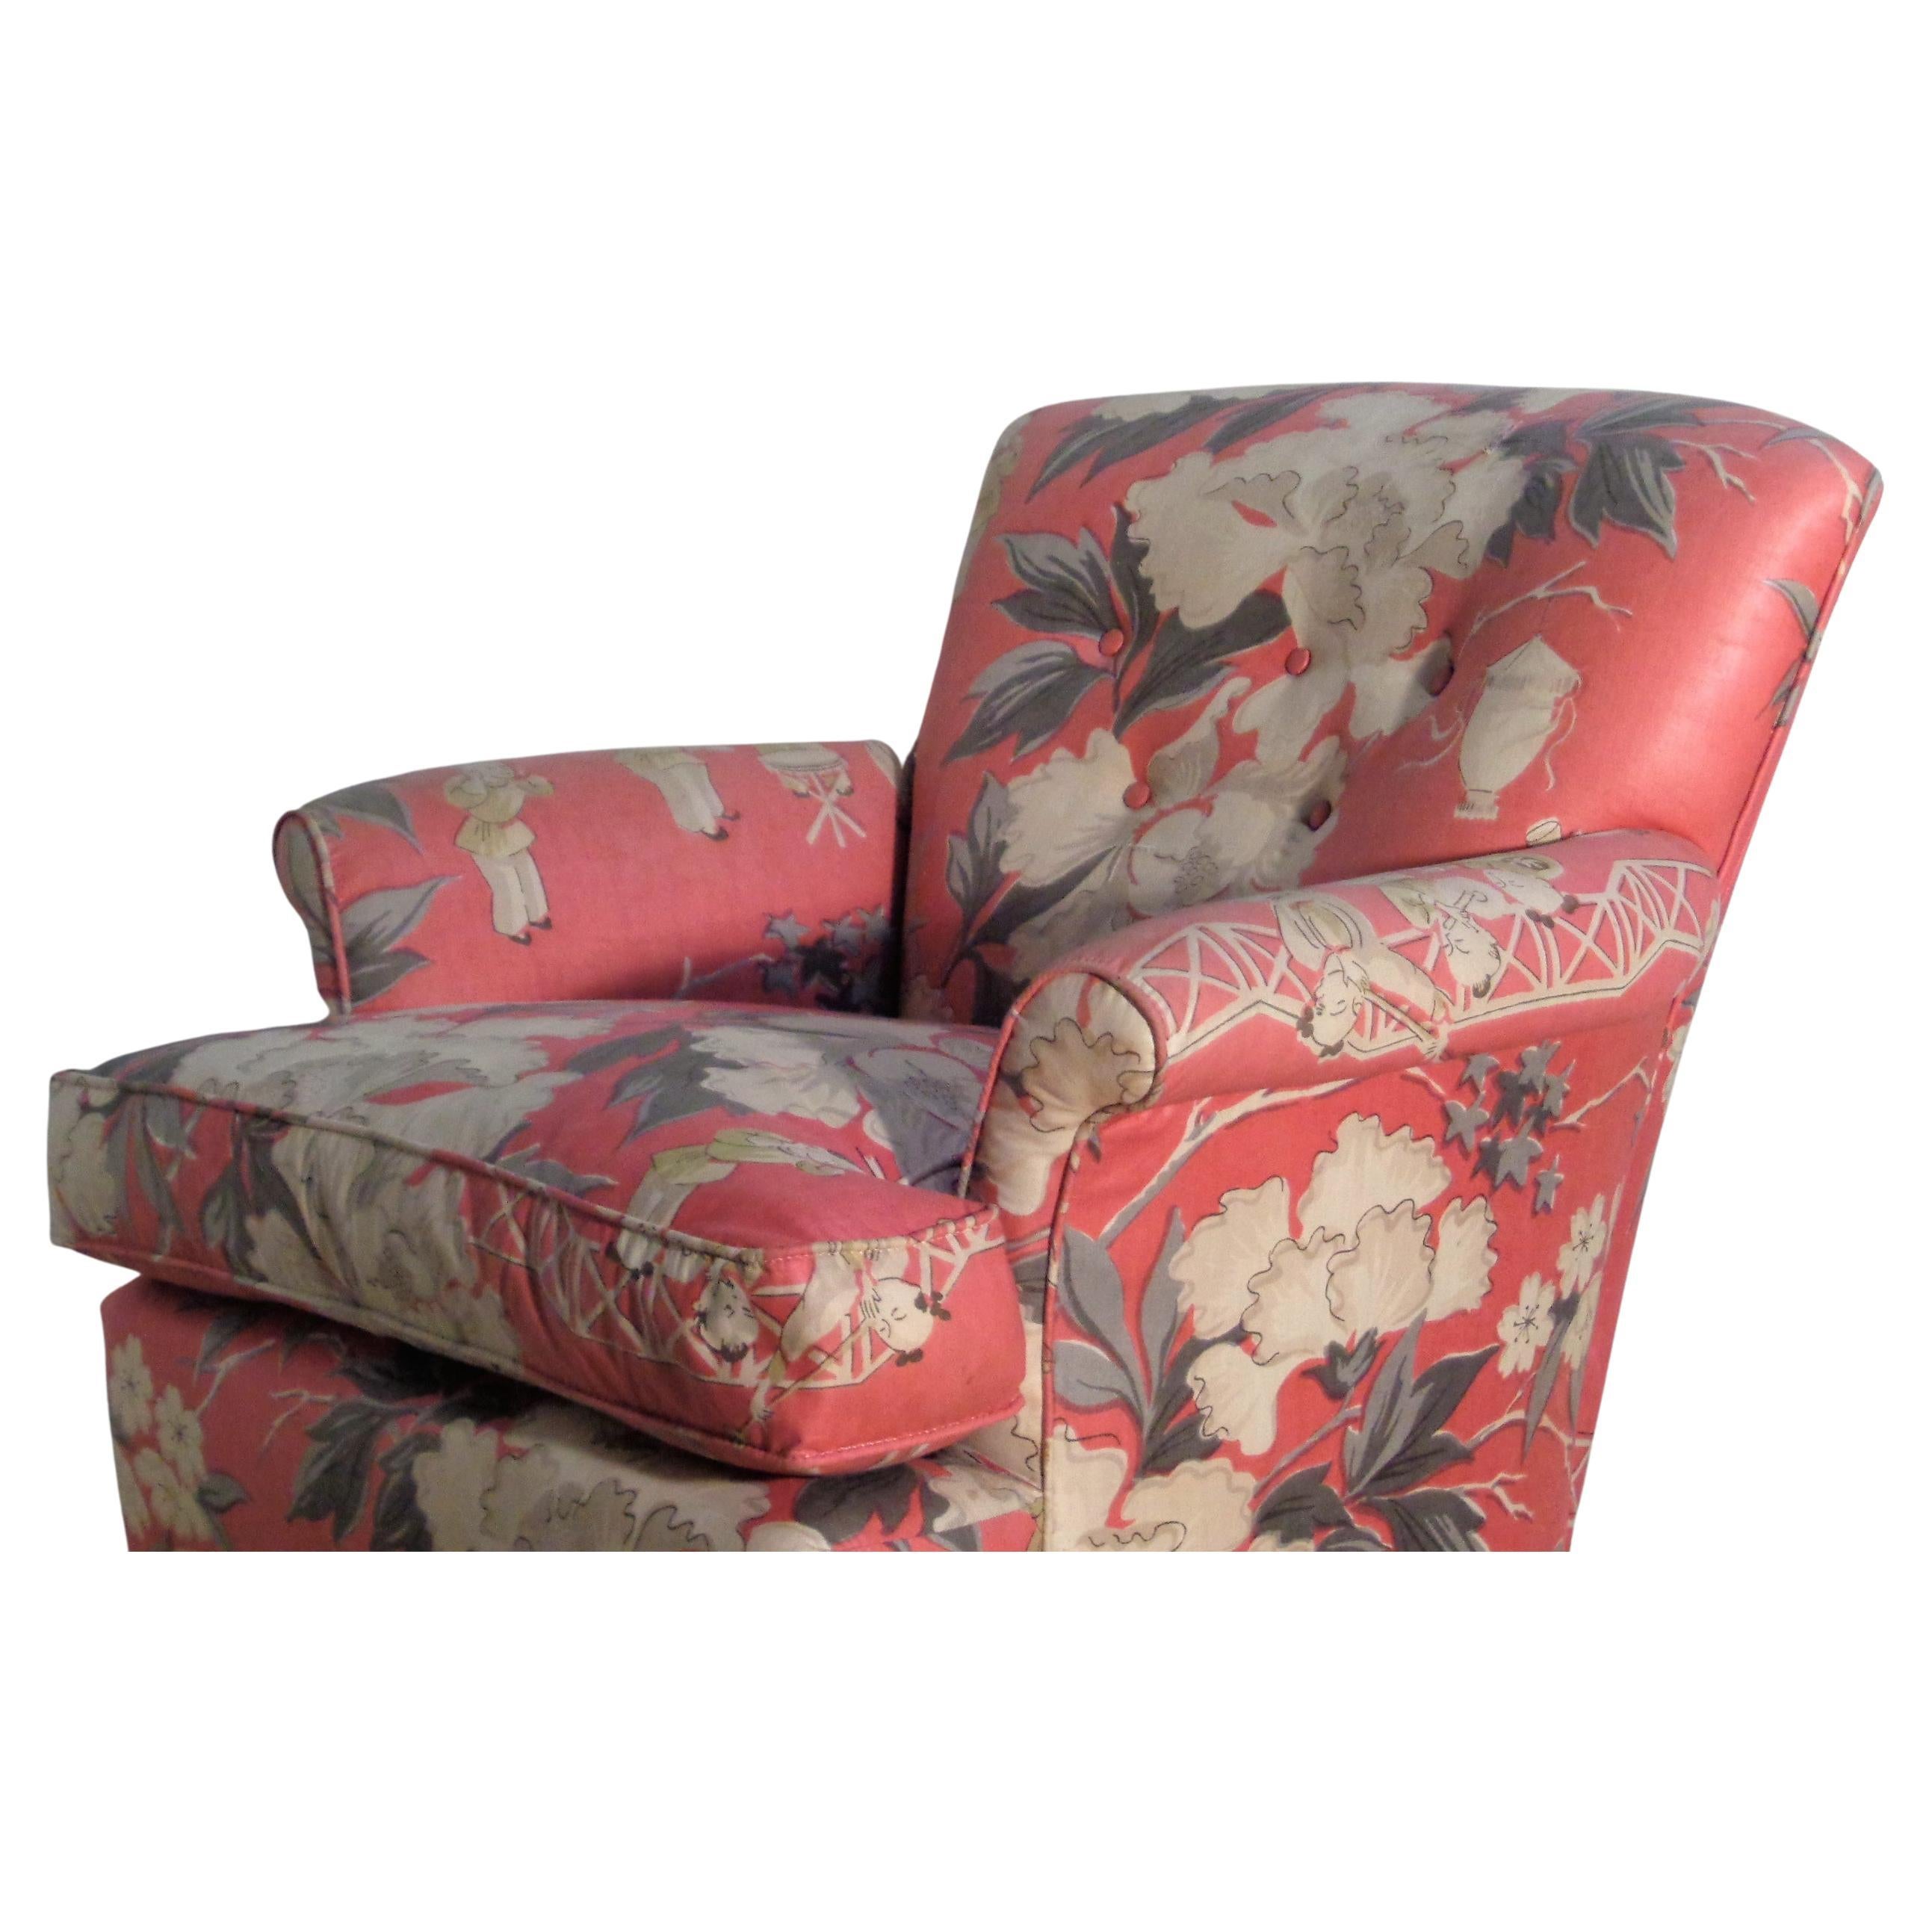 American  Dorothy Draper Style Original Chinoiserie Upholstered Lounge Chair, 1940's For Sale